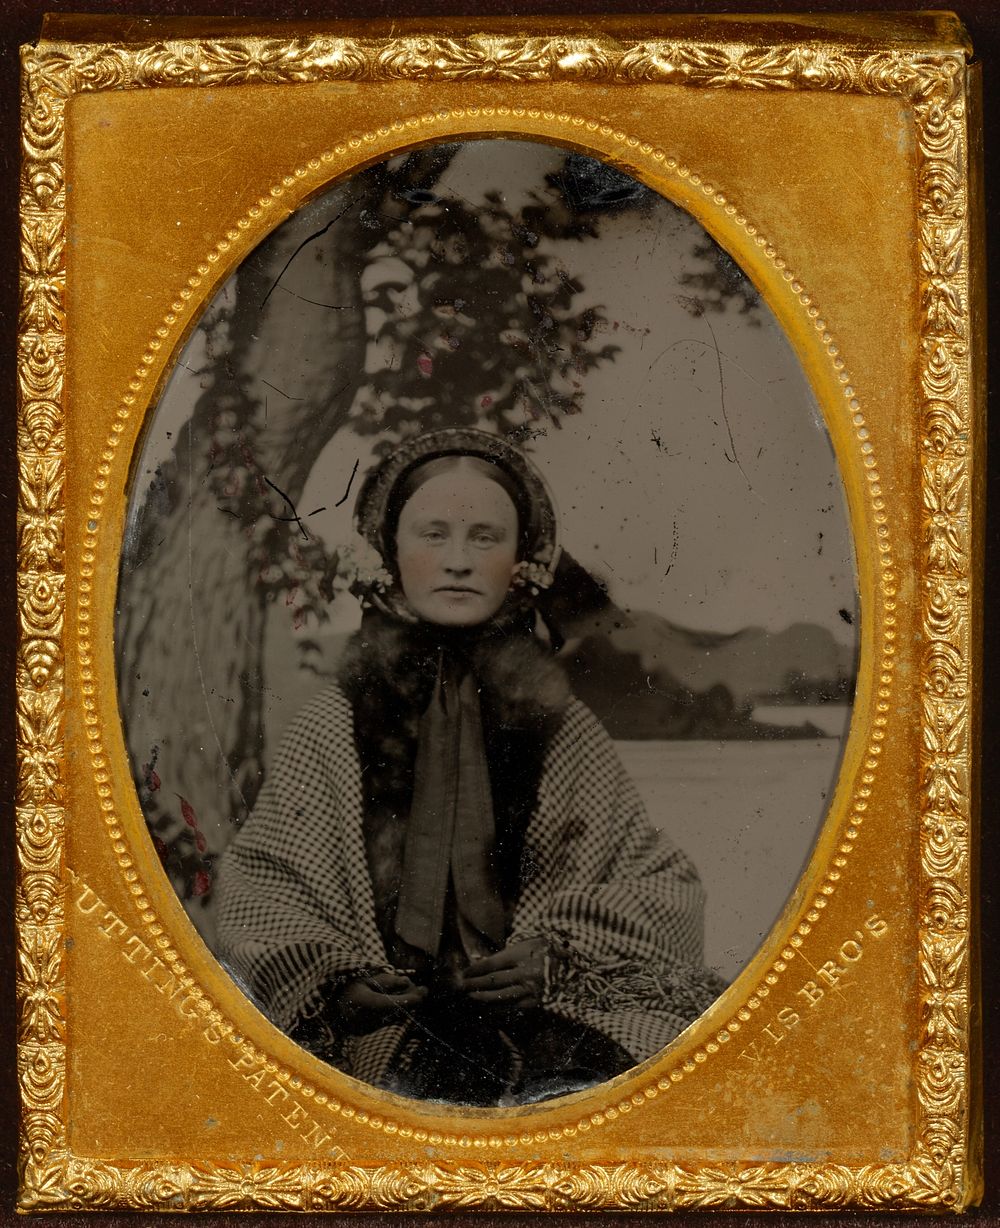 Portrait of a young woman wearing a bonnet, shawl, and gloves by Davis Brothers